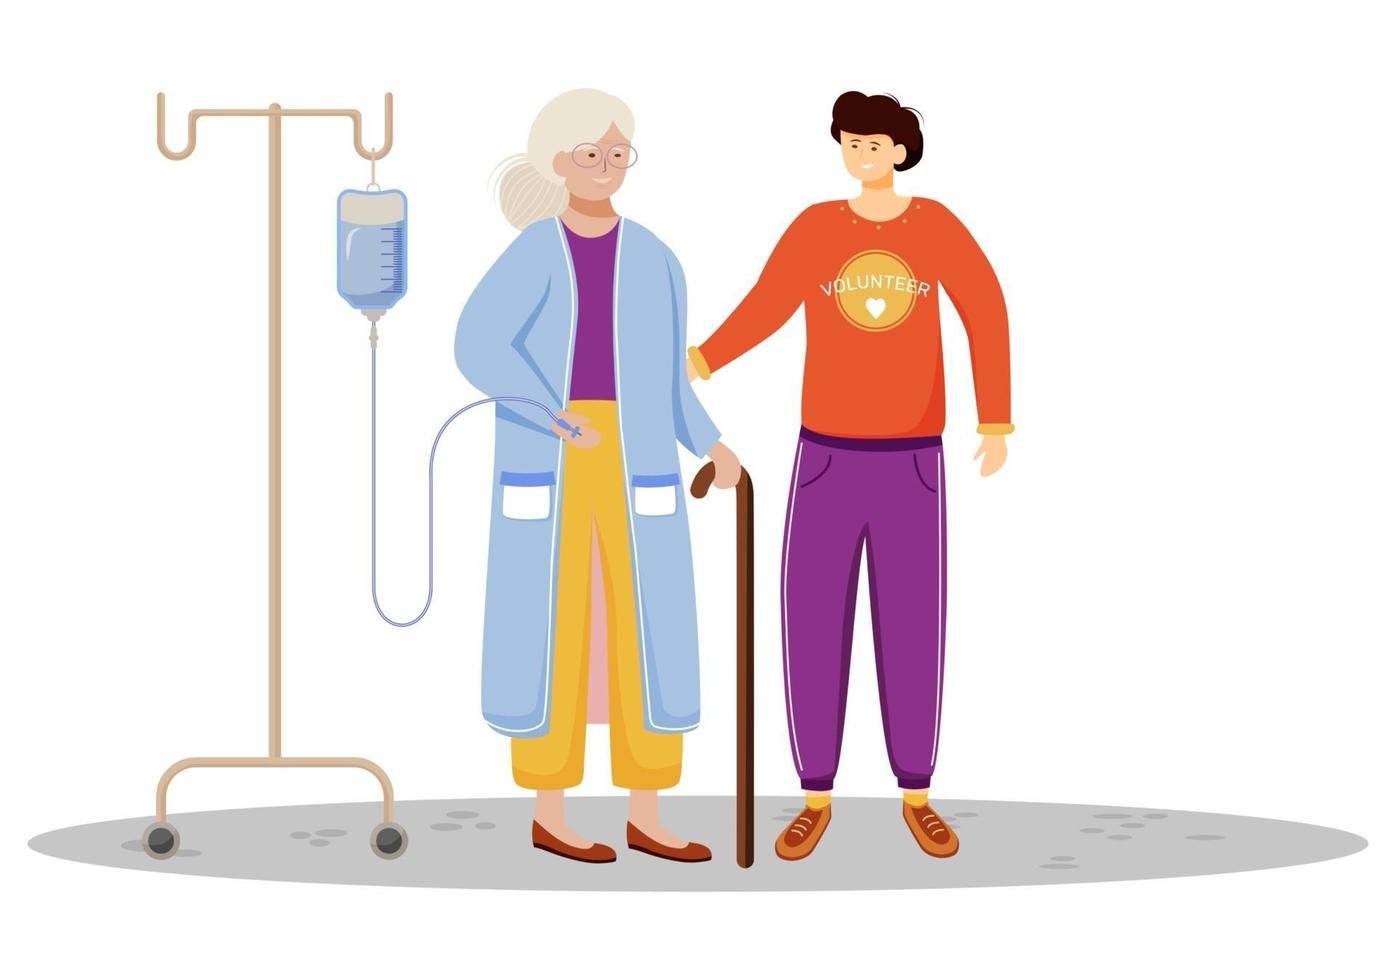 Elderly welfare flat vector illustration. Happy volunteer and old woman isolated cartoon characters on white background. Young son taking care of aged mother. Family support, medical help work concept